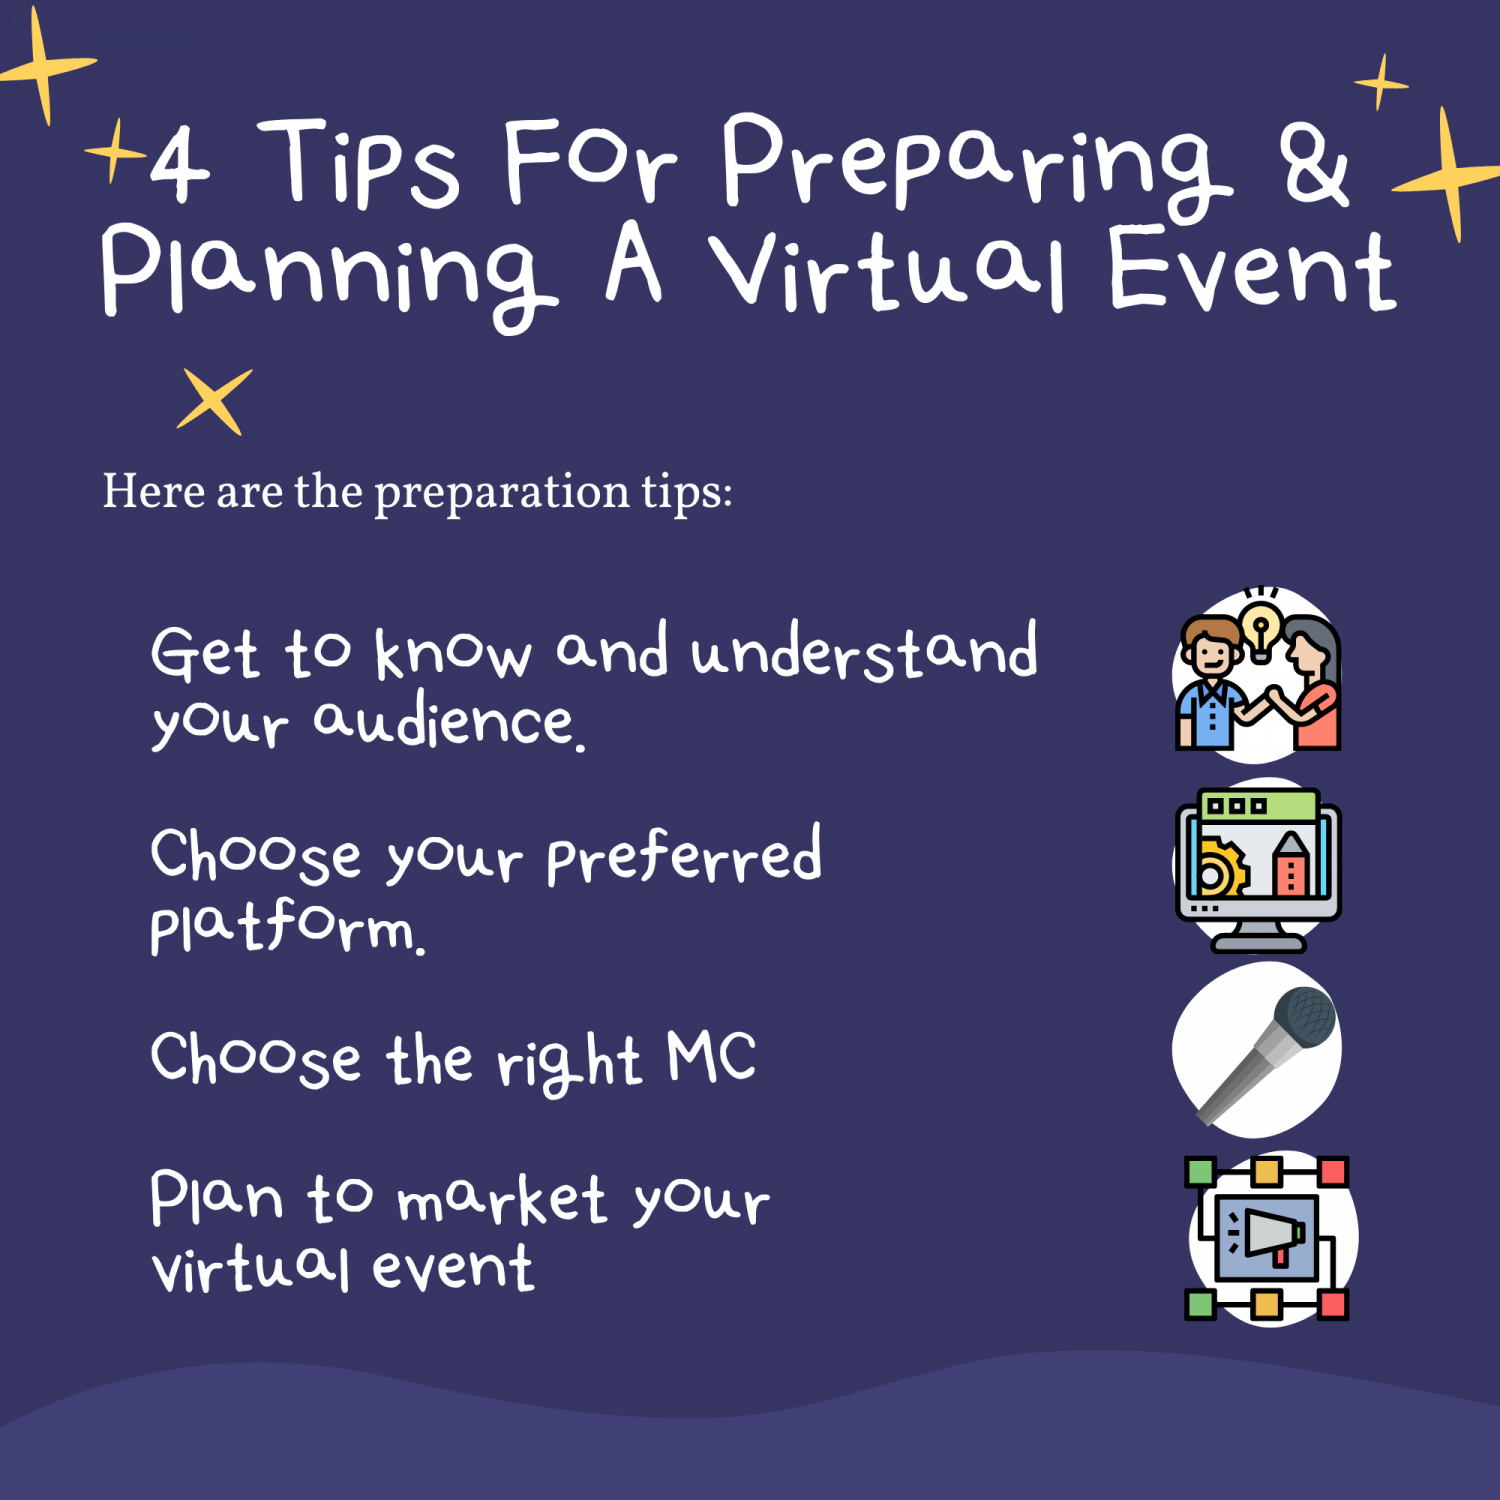 4 Tips For Preparing & Planning A Virtual Event Infographic